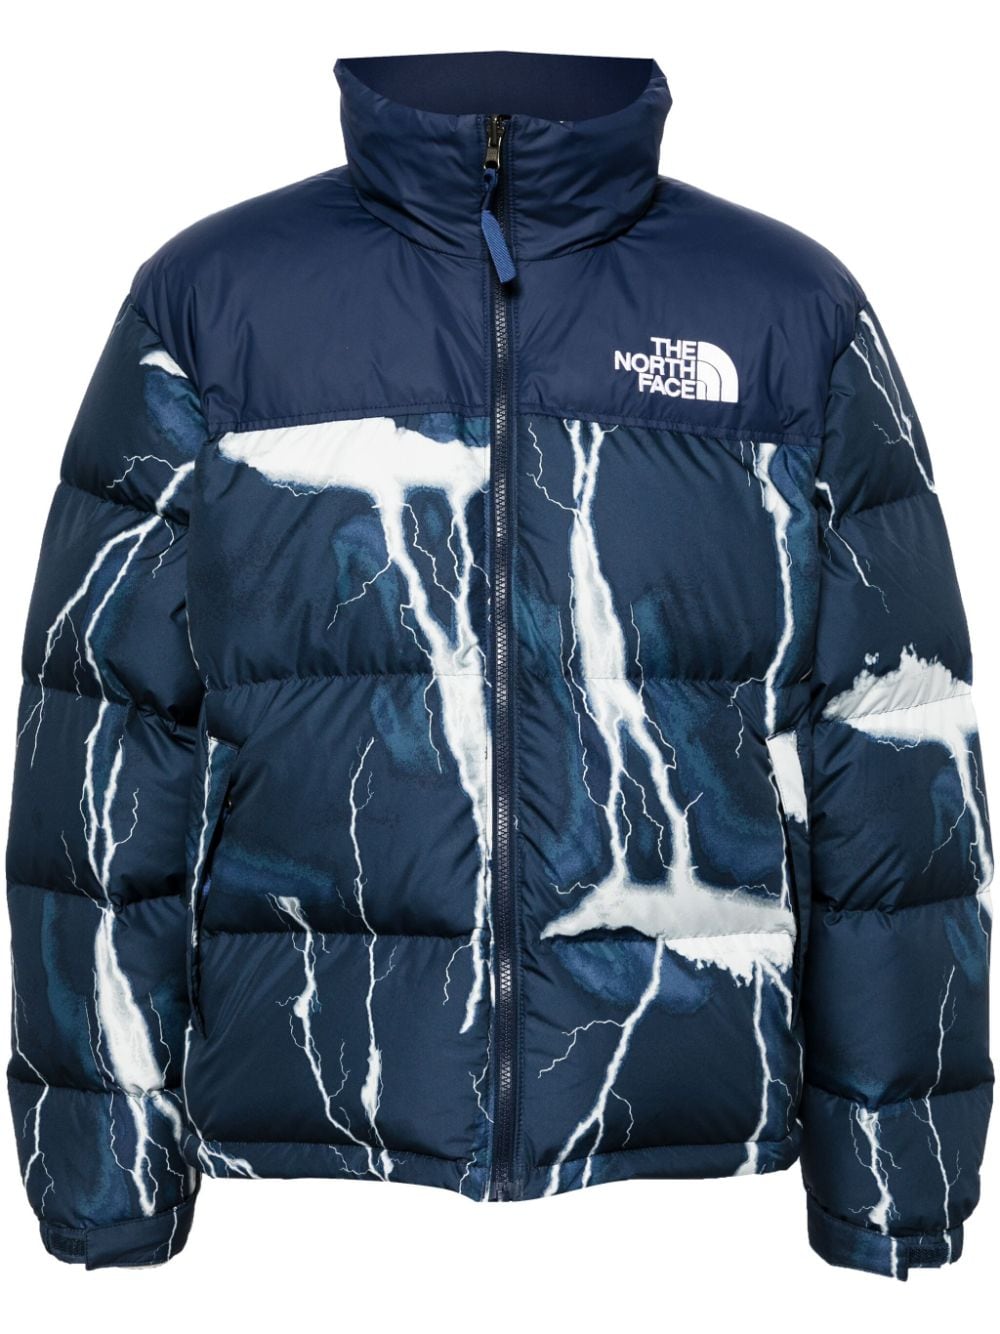 The North Face 1996 Retro Nuptse puffer jacket - Blue von The North Face